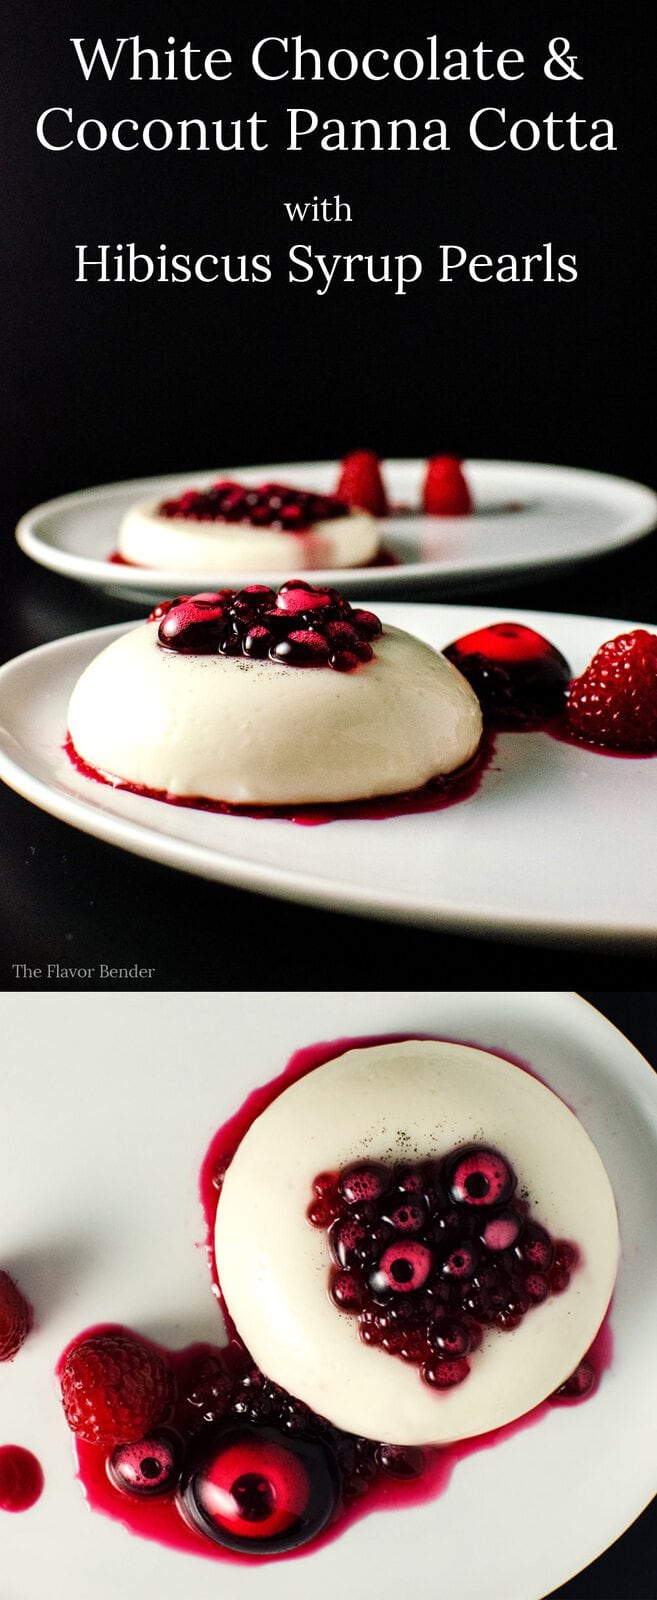 White Chocolate and Coconut Panna Cotta with Hibiscus Syrup Pearls. Hibiscus pearls made using Reverse Spherification, but can be served without spherification as well. Sweet, creamy perfectly "jiggly" panna cotta with delicious sweet, citrusy hibiscus with hints of raspberry!